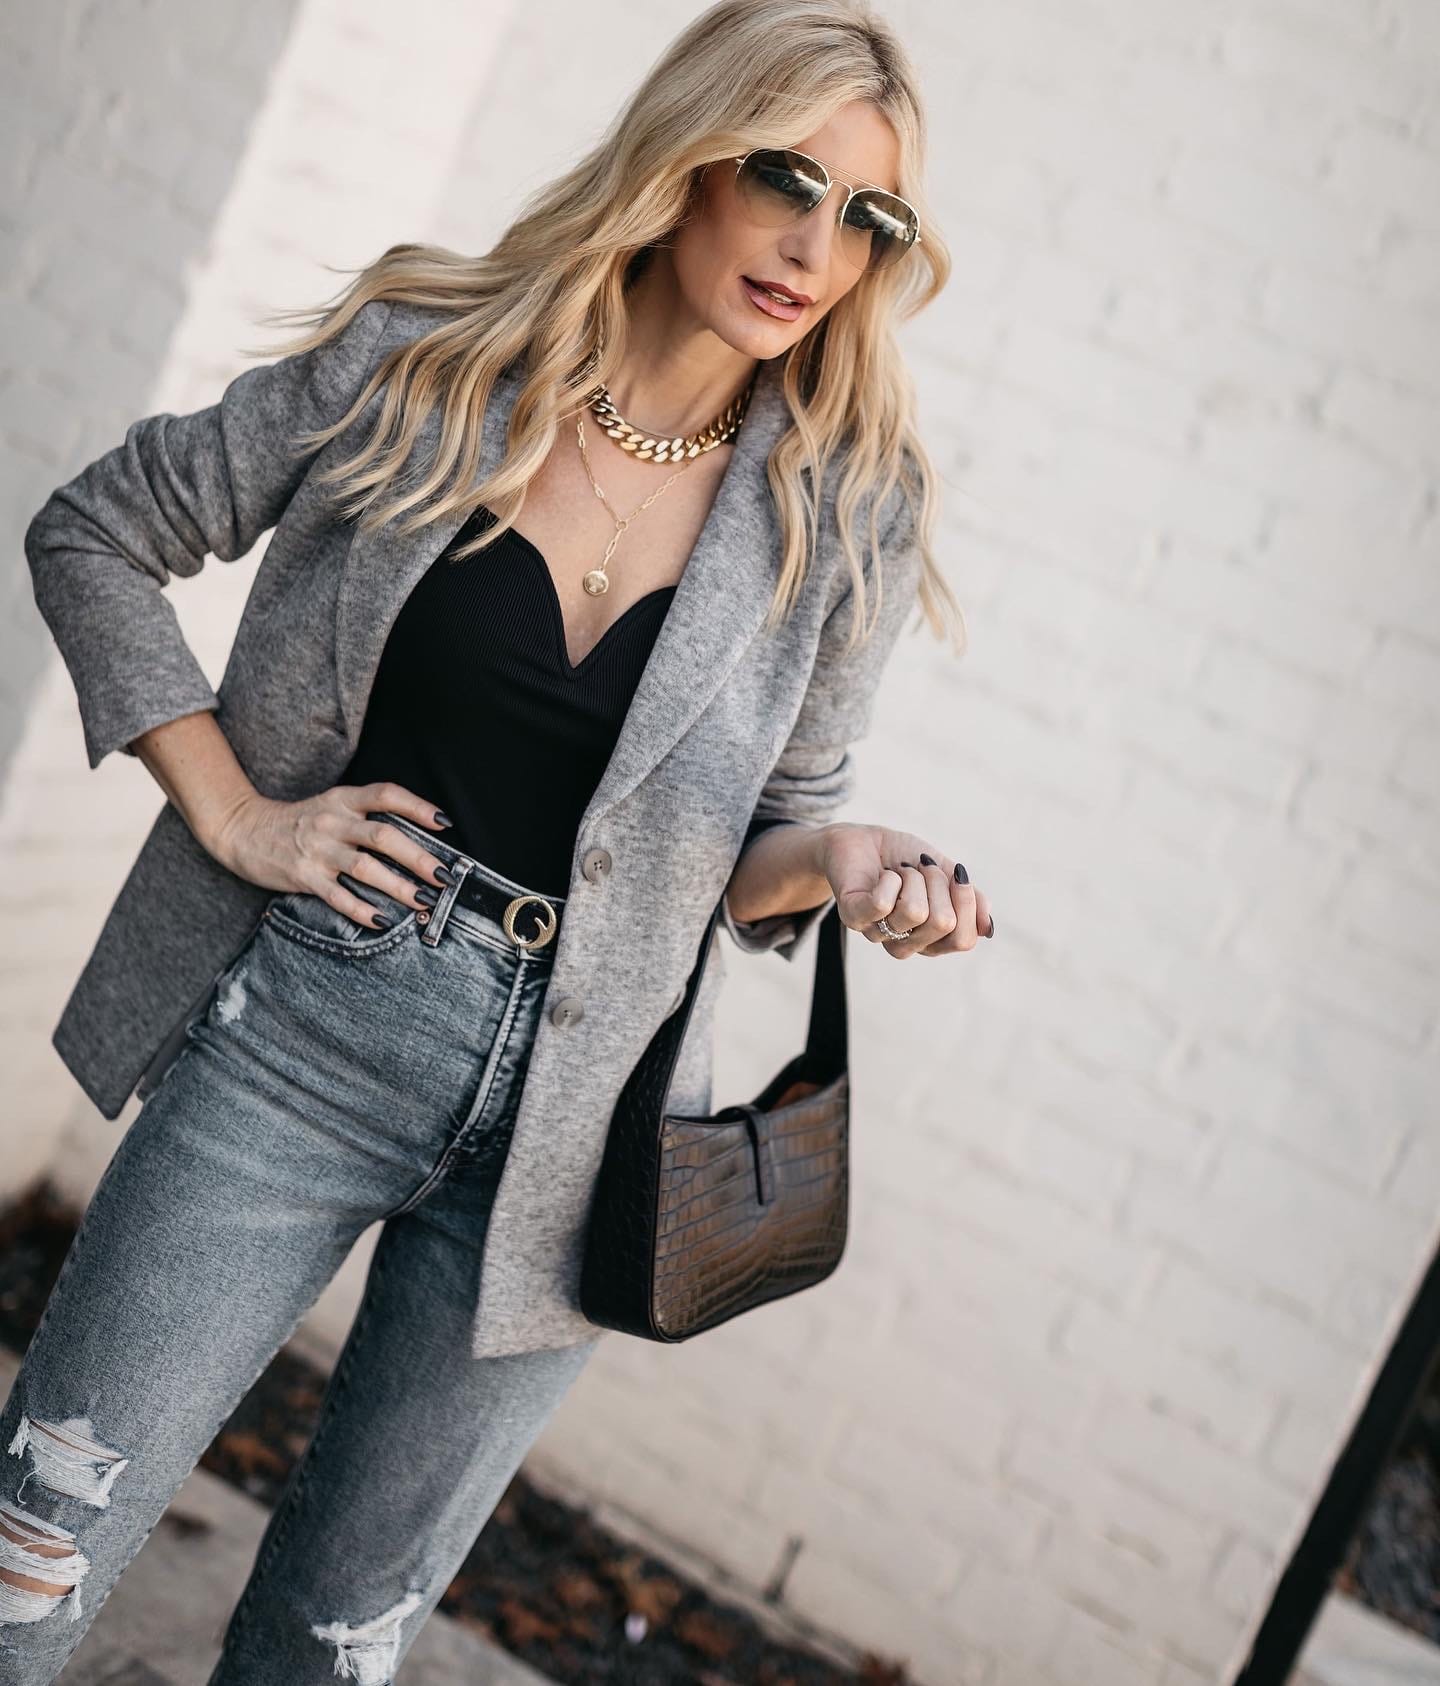 Dallas fashion blogger wearing fabulous under $100 finds